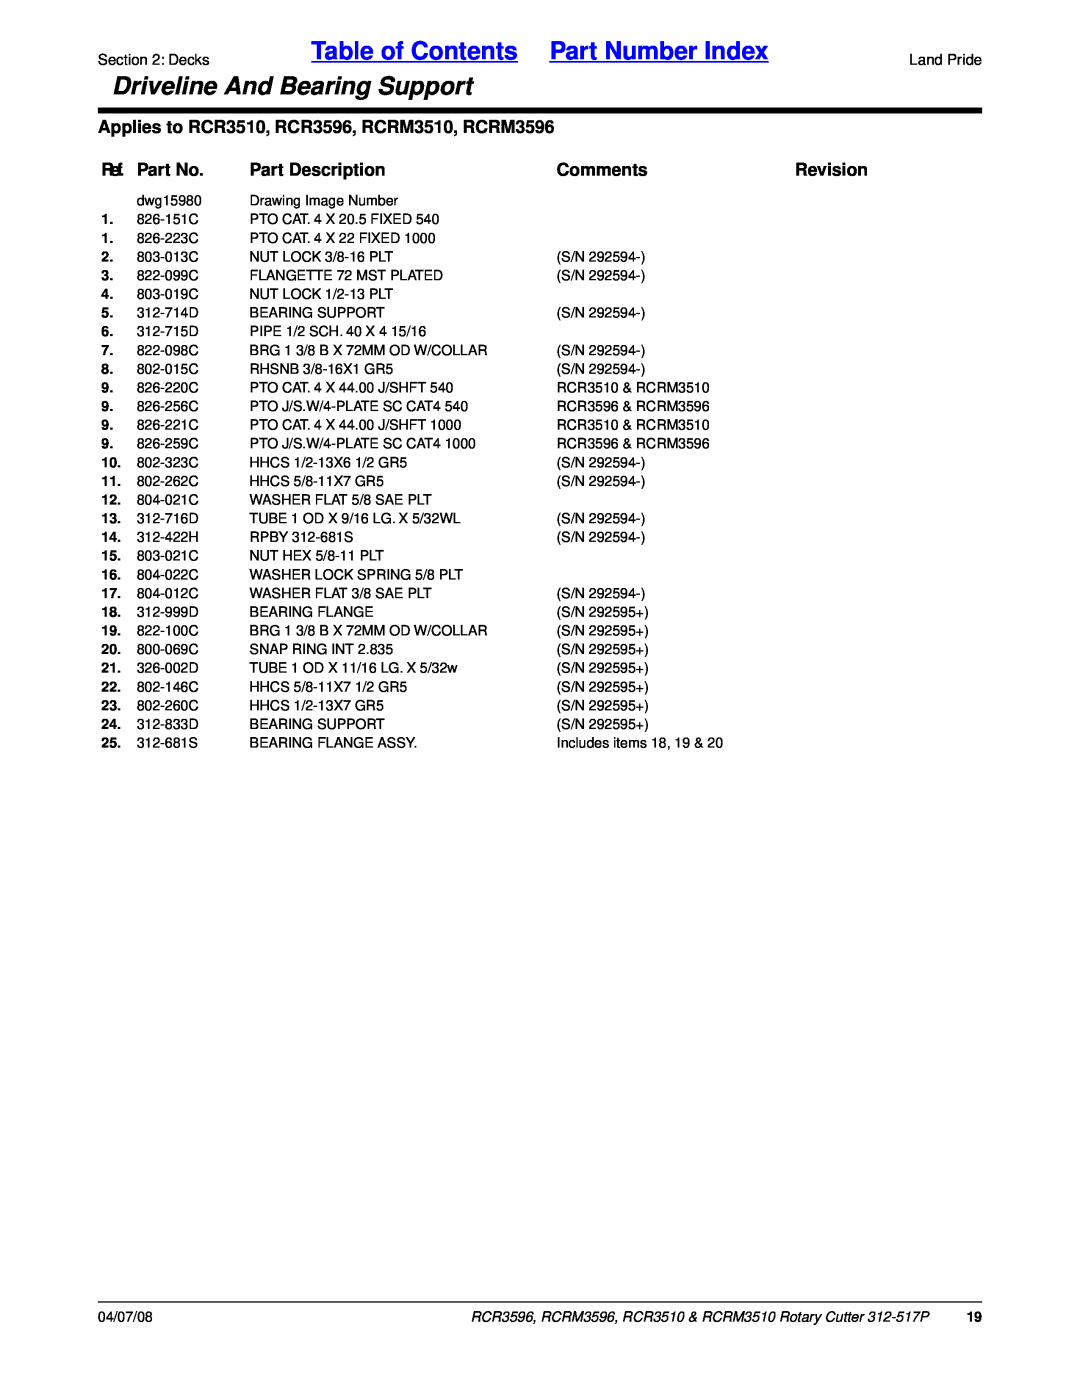 Land Pride RCR3596 Table of Contents Part Number Index, Driveline And Bearing Support, Ref. Part No, Part Description 